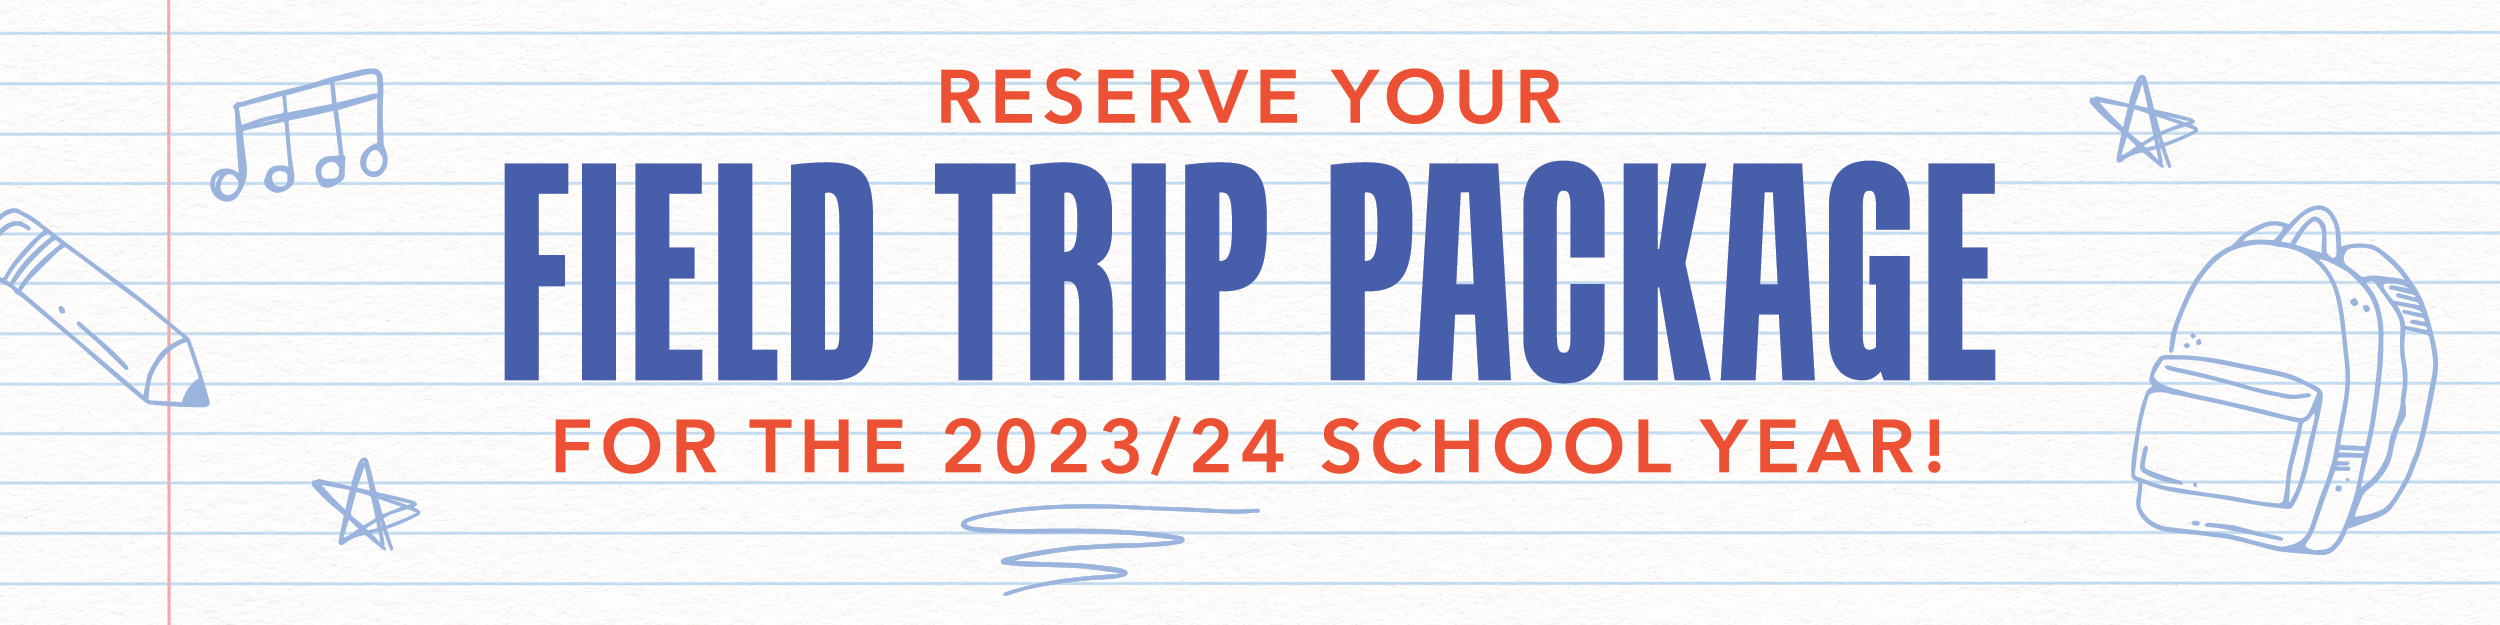 Reserve your Field Trip Package for the 2023/24 school year!